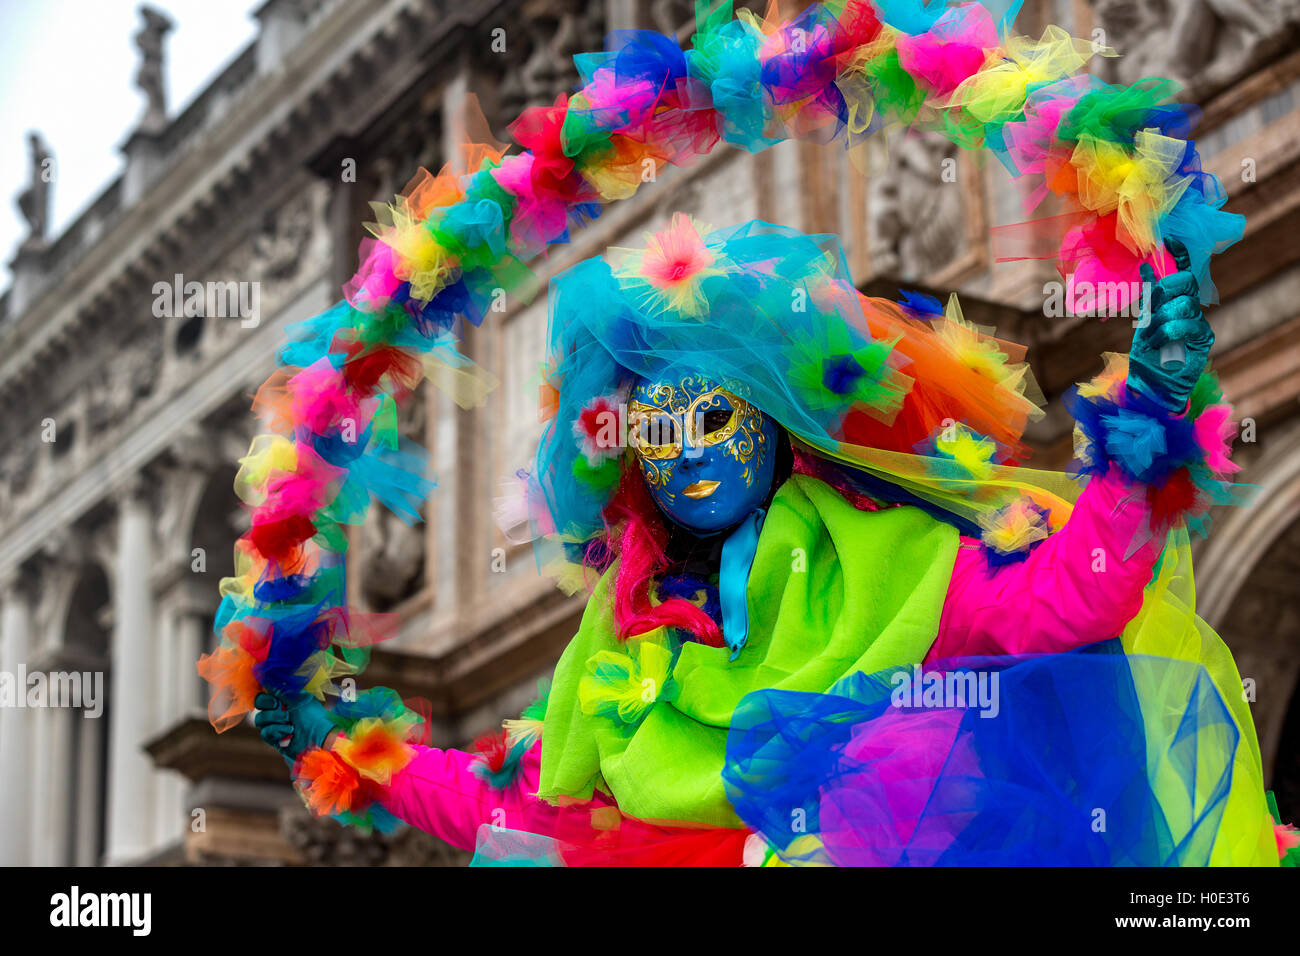 A woman dressed up for the Carnival in Venice, Italy Stock Photo